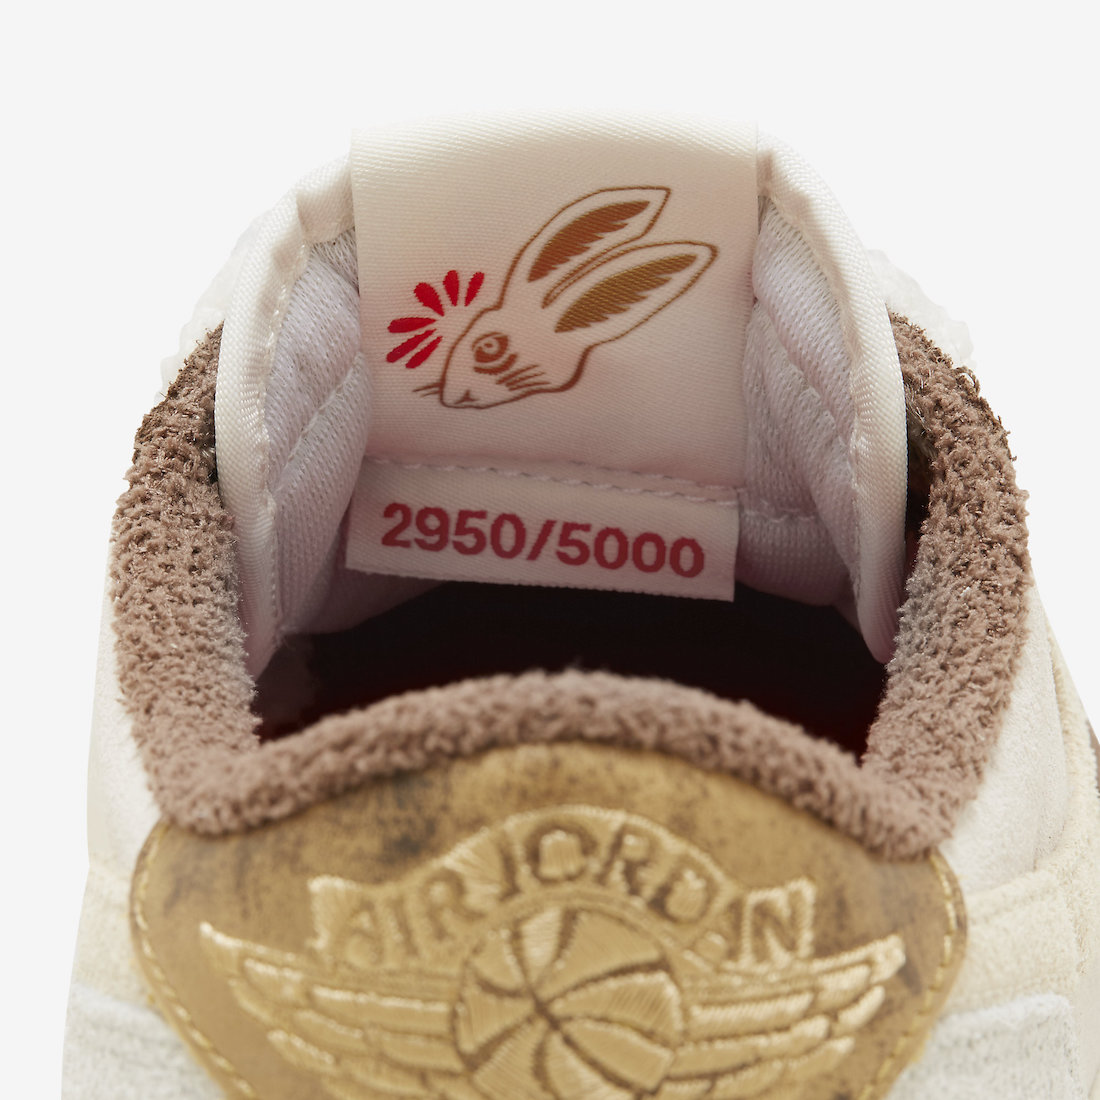 Official Look At The Air Jordan 1 Low OG “Year Of The Rabbit”